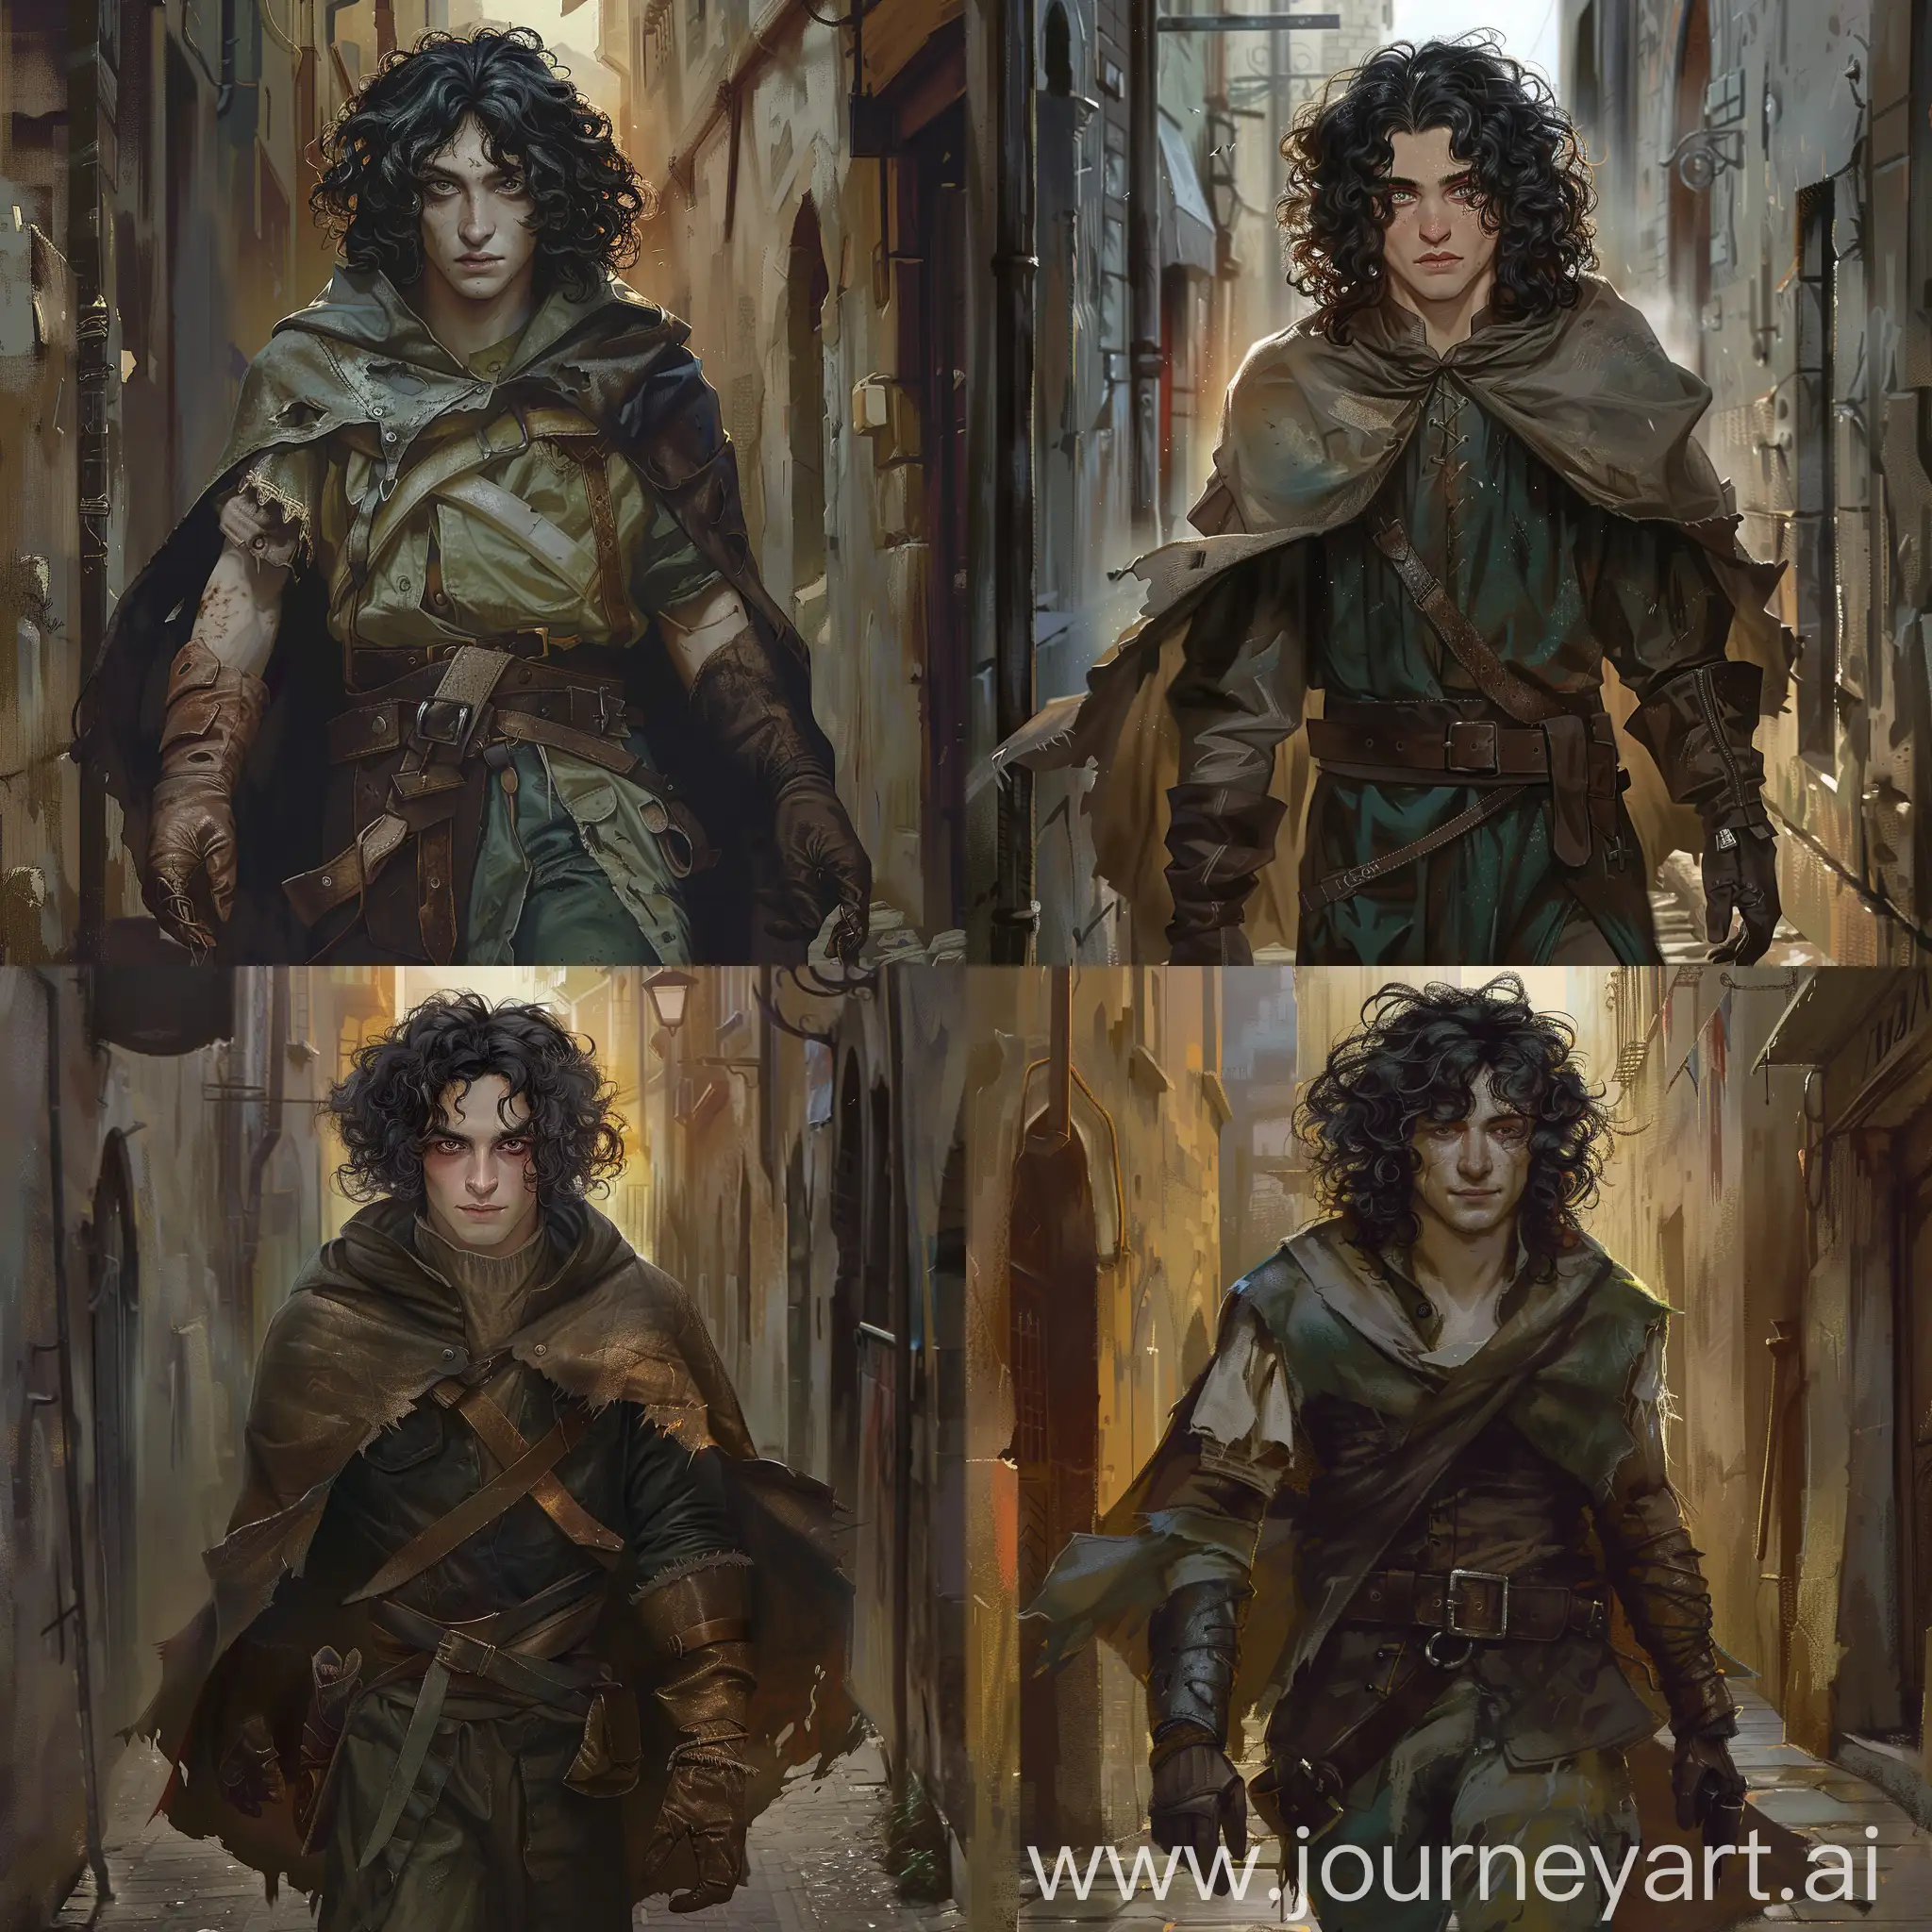 Young-Artificer-Navigating-Sunset-Alley-in-Dungeons-and-Dragons-Art